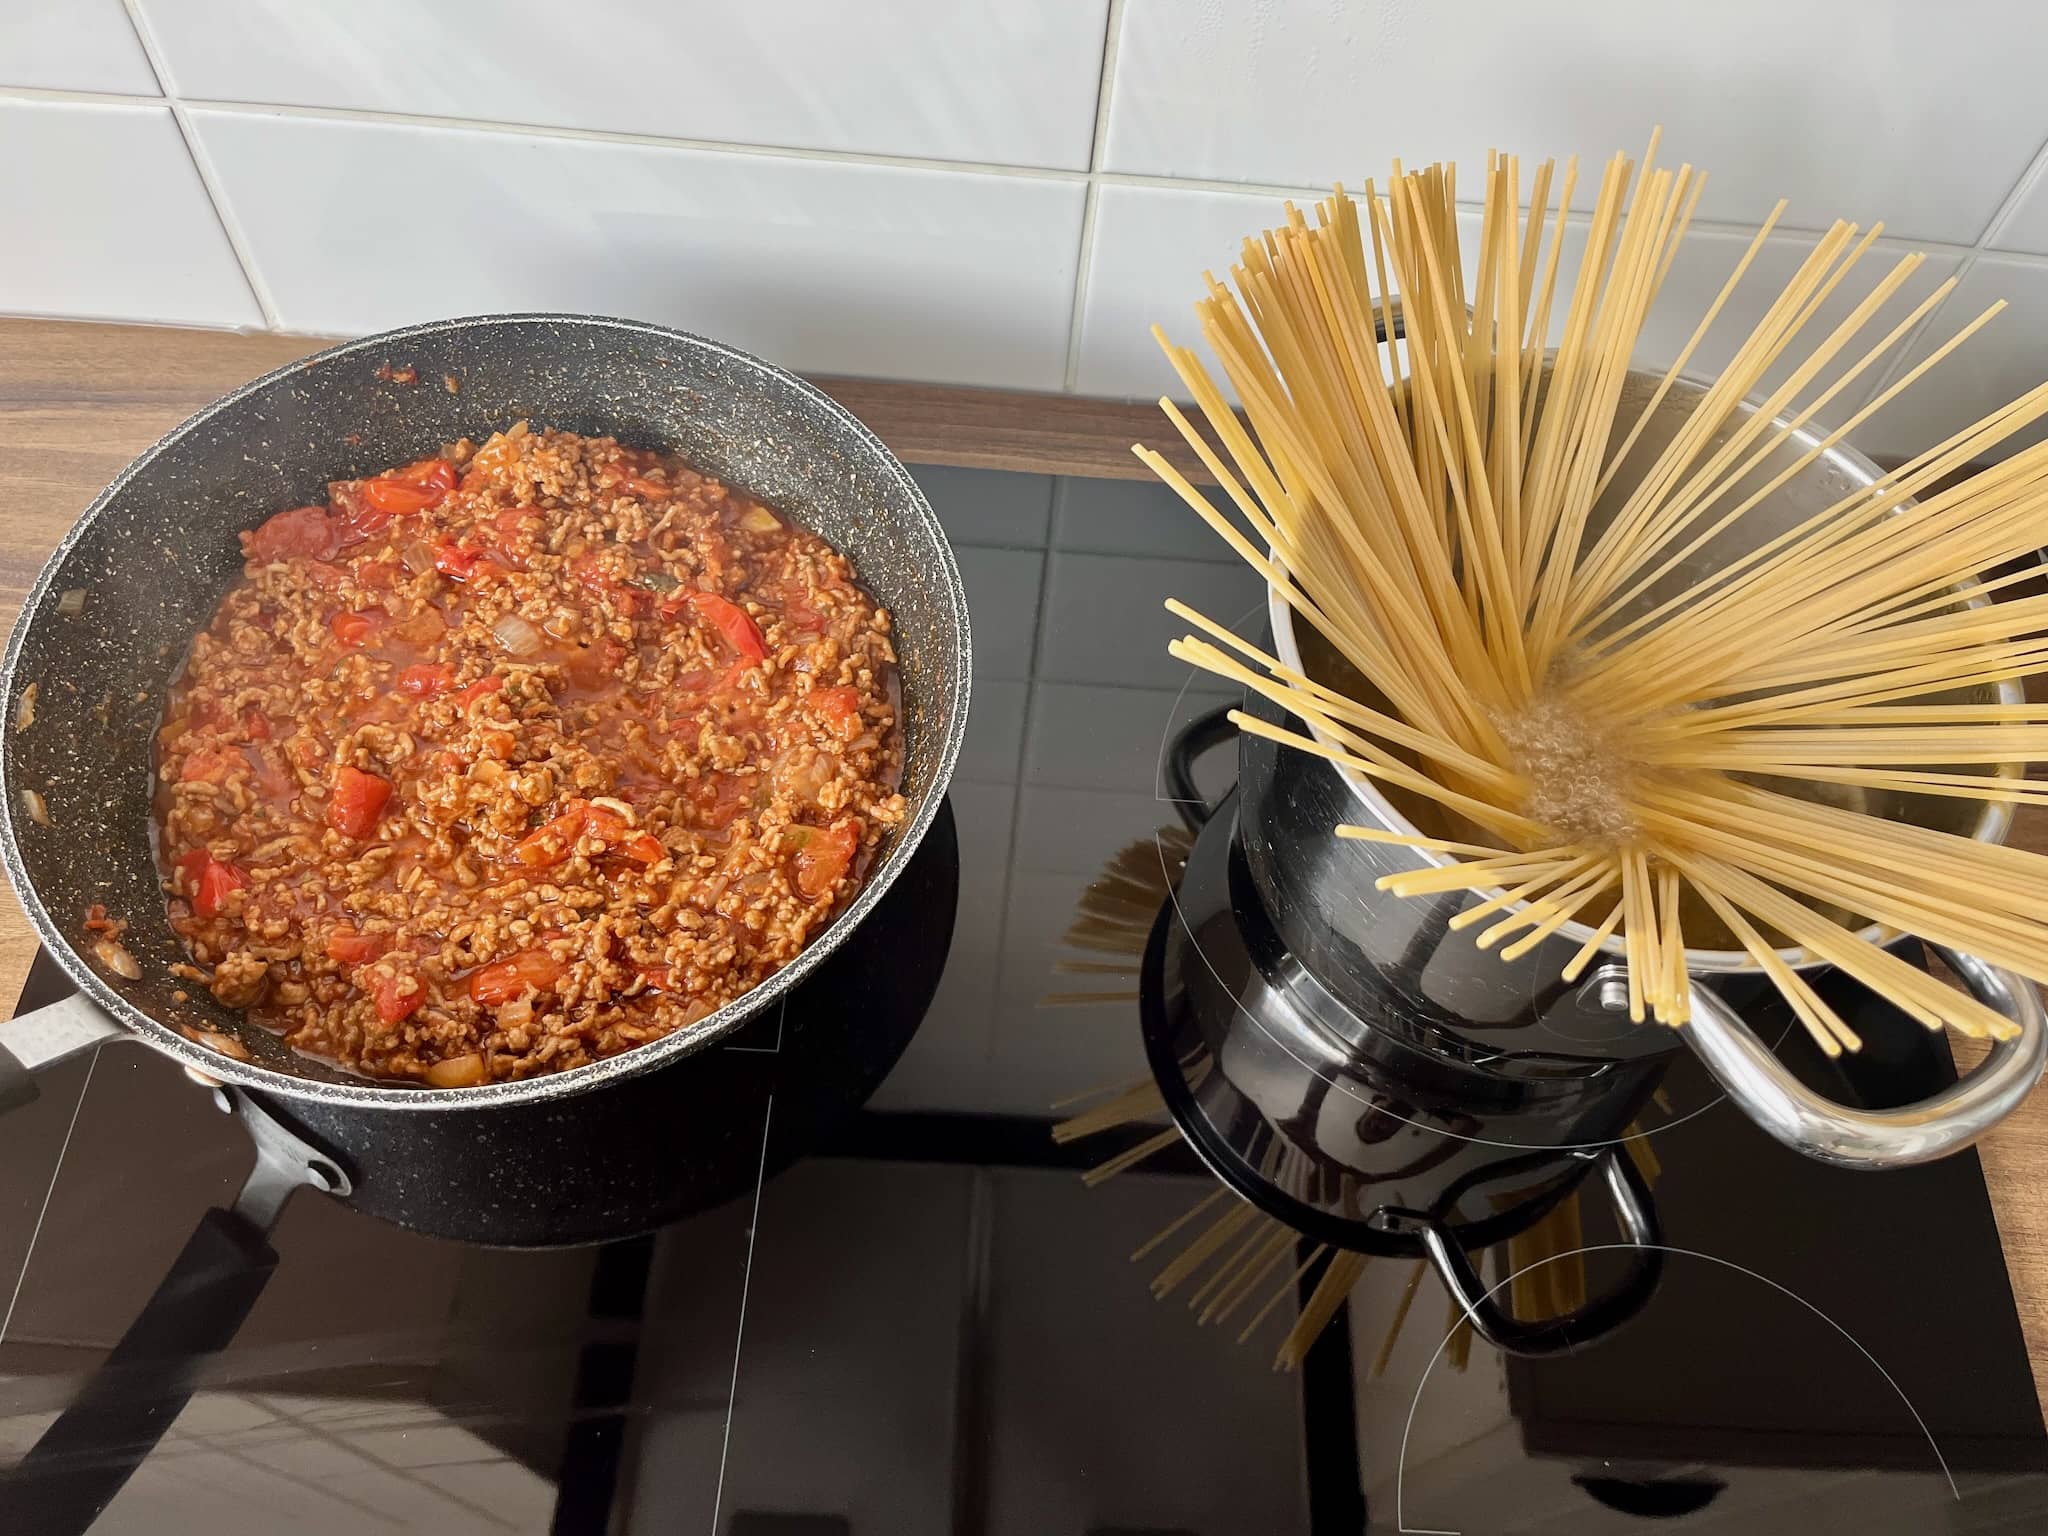 Bolognese simmering in a pan (left) and pasta cooking (right)